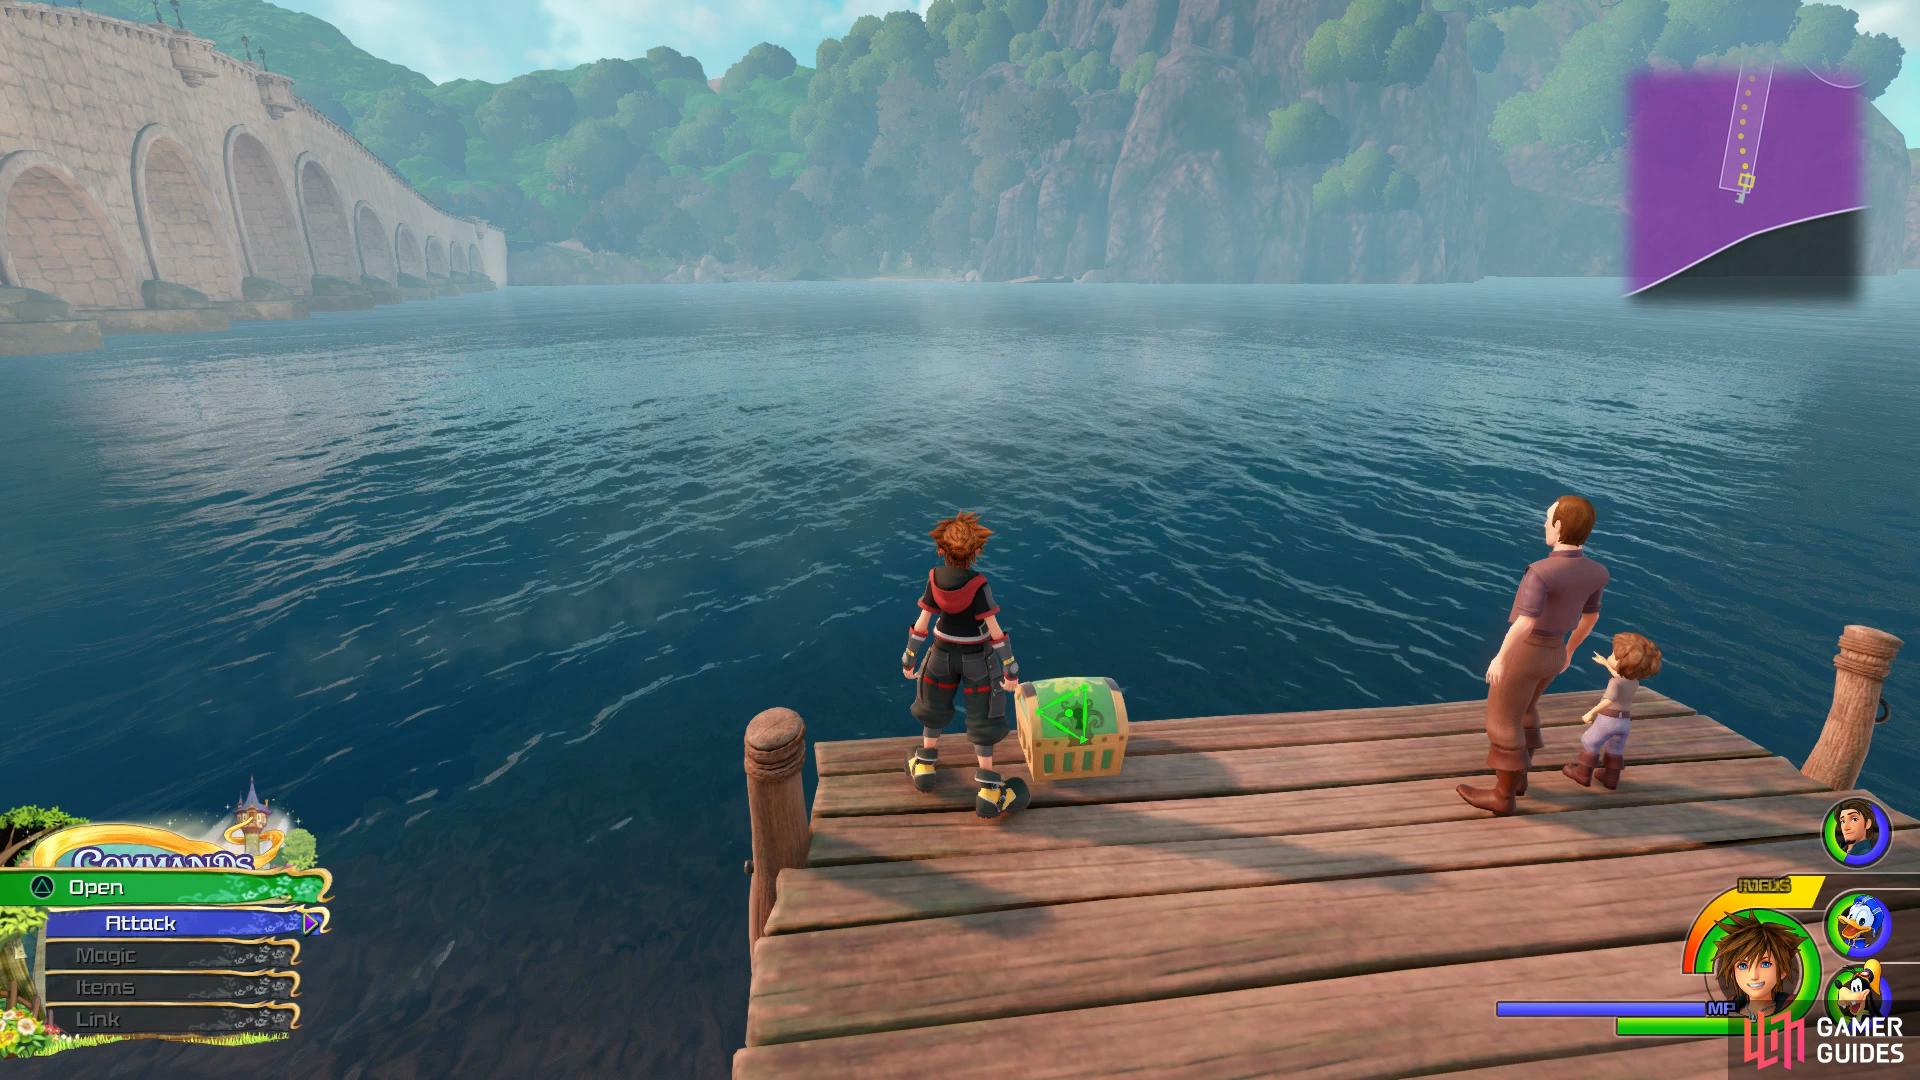 Head to the end of the pier to find the chest.